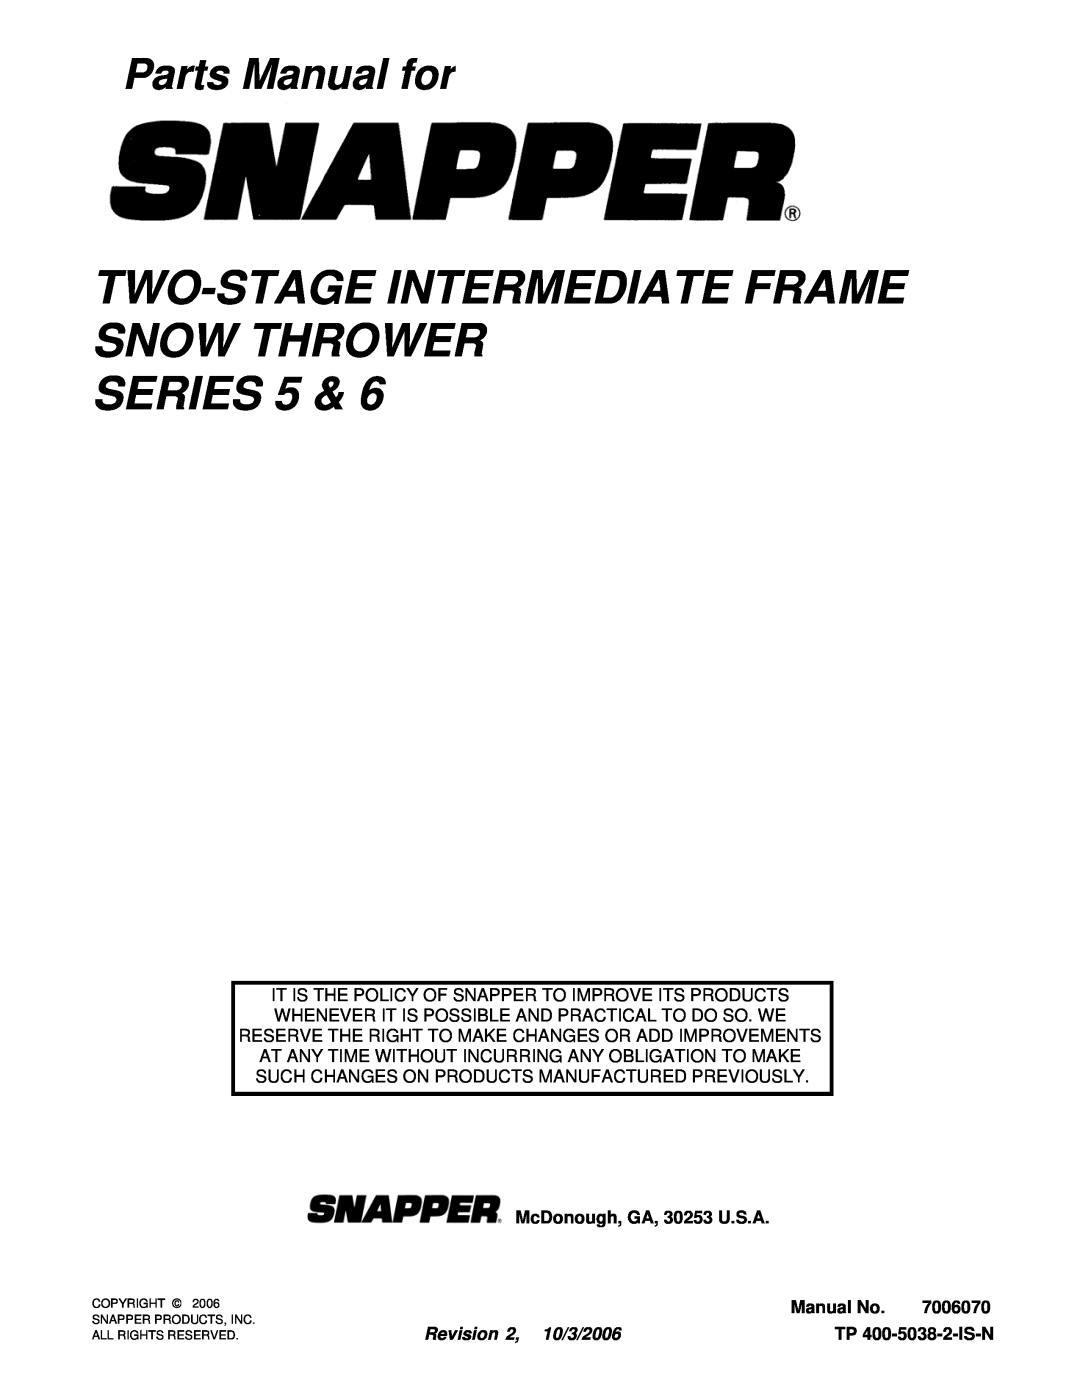 Snapper EI TWO-STAGE INTERMEDIATE FRAME SNOW THROWER SERIES 5, Parts Manual for, McDonough, GA, 30253 U.S.A, Manual No 